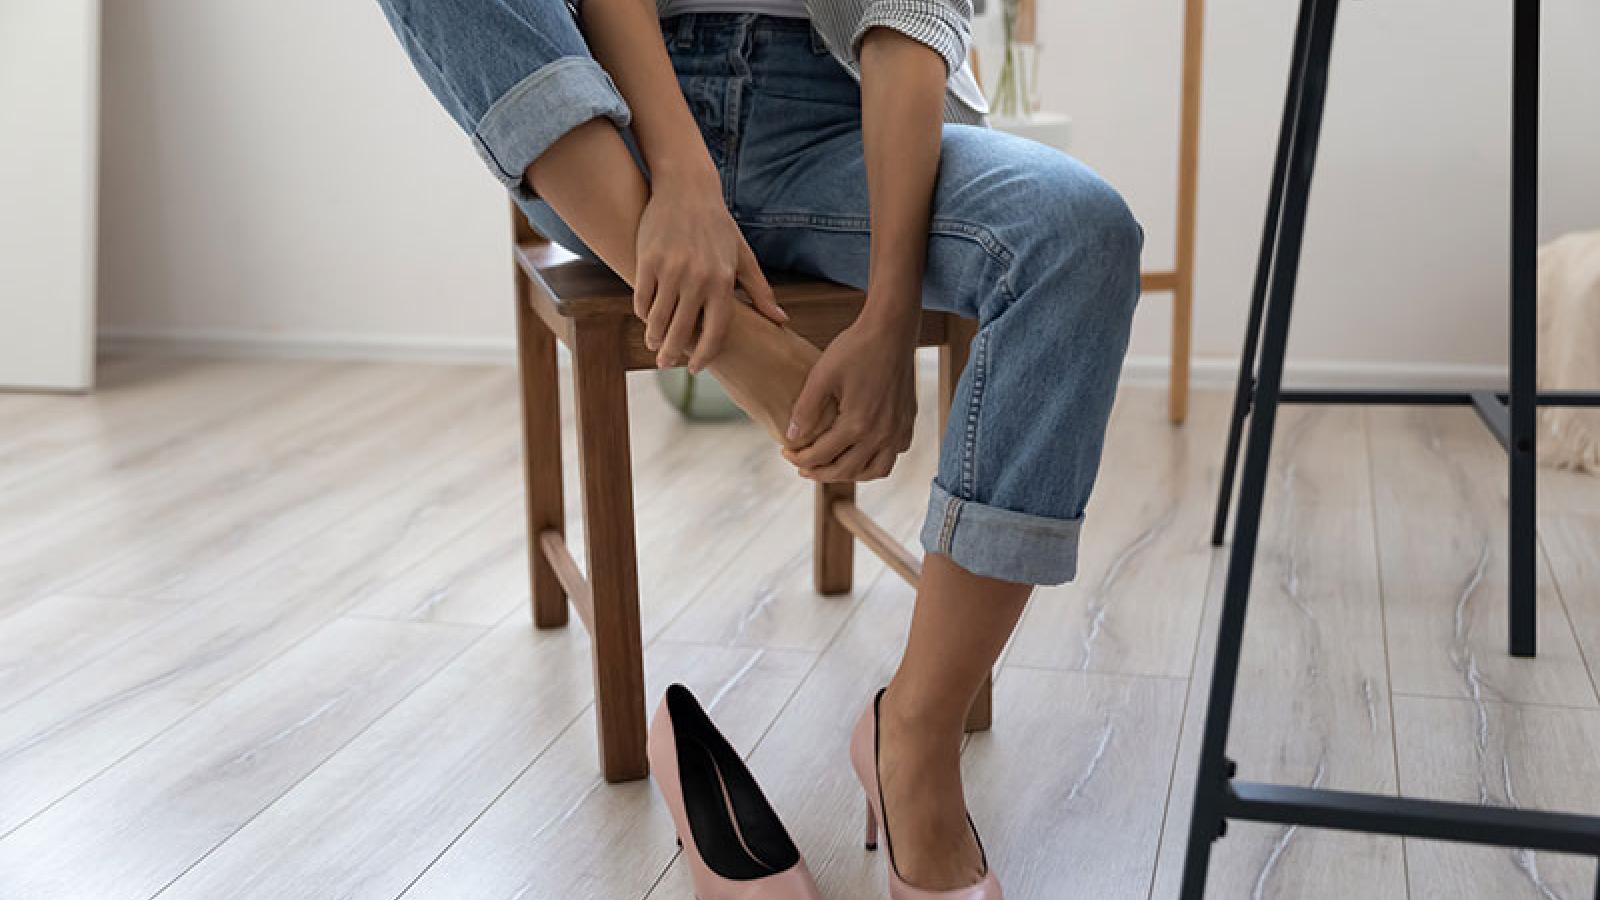 How Your Shoes May Be Hurting Your Feet